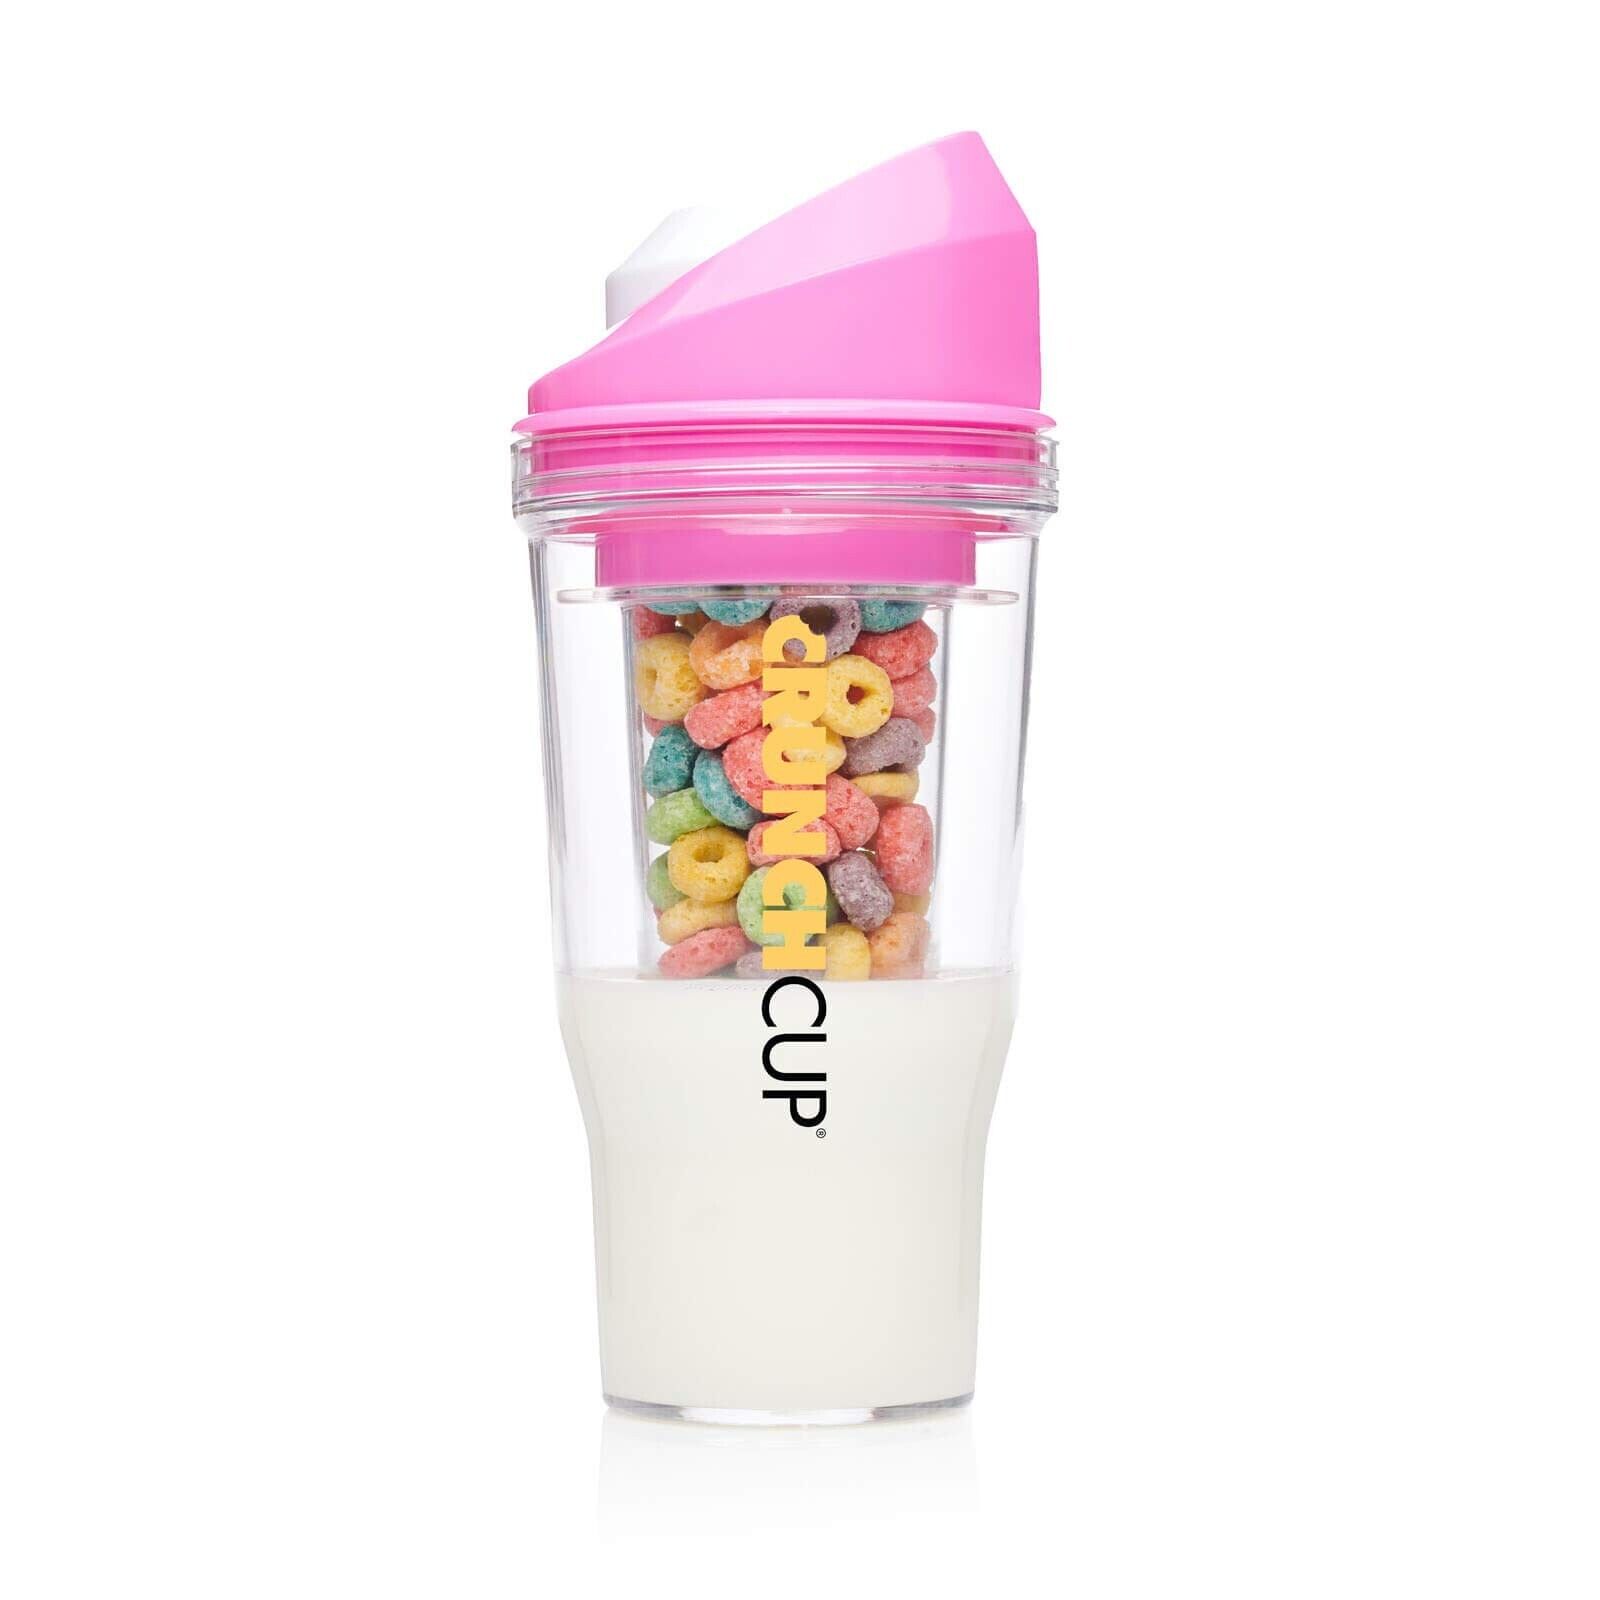 The Crunch Cup - Pink - Portable Cereal Cup with No Bowl or Cereal